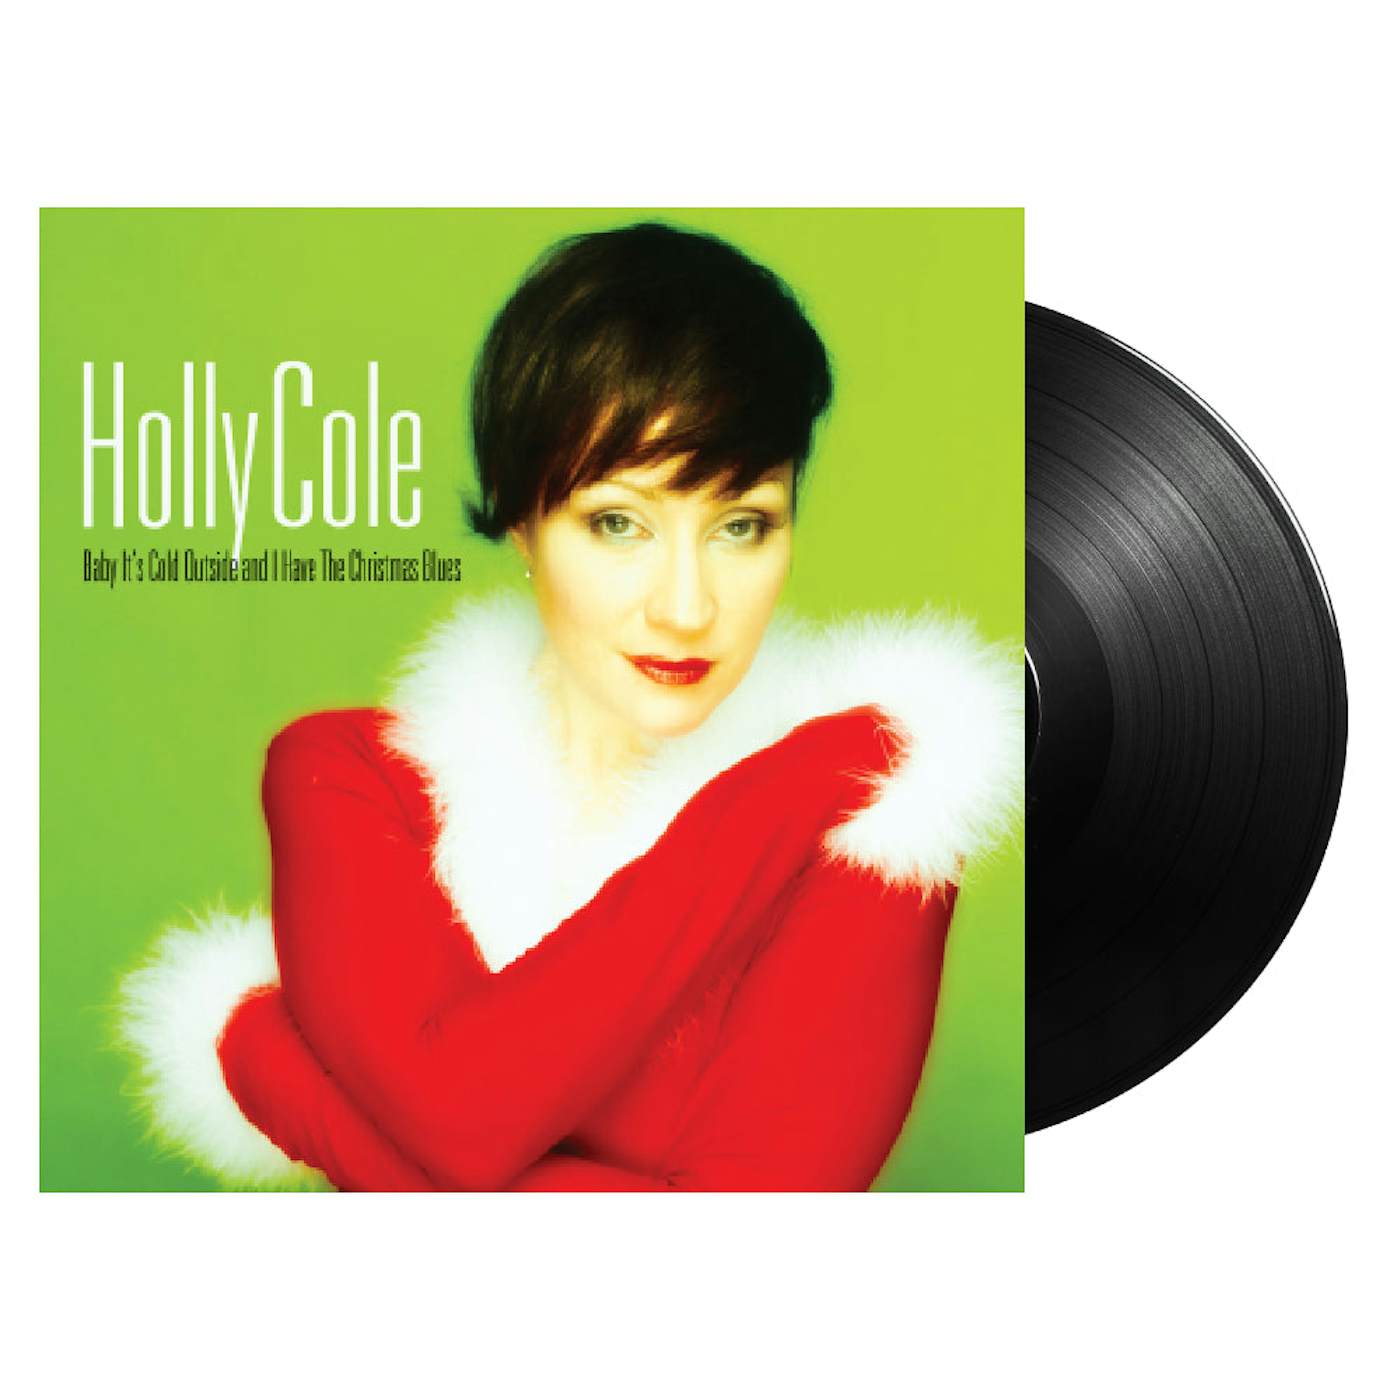 Holly Cole Baby Its Cold Outside and I Have The Christmas Blues